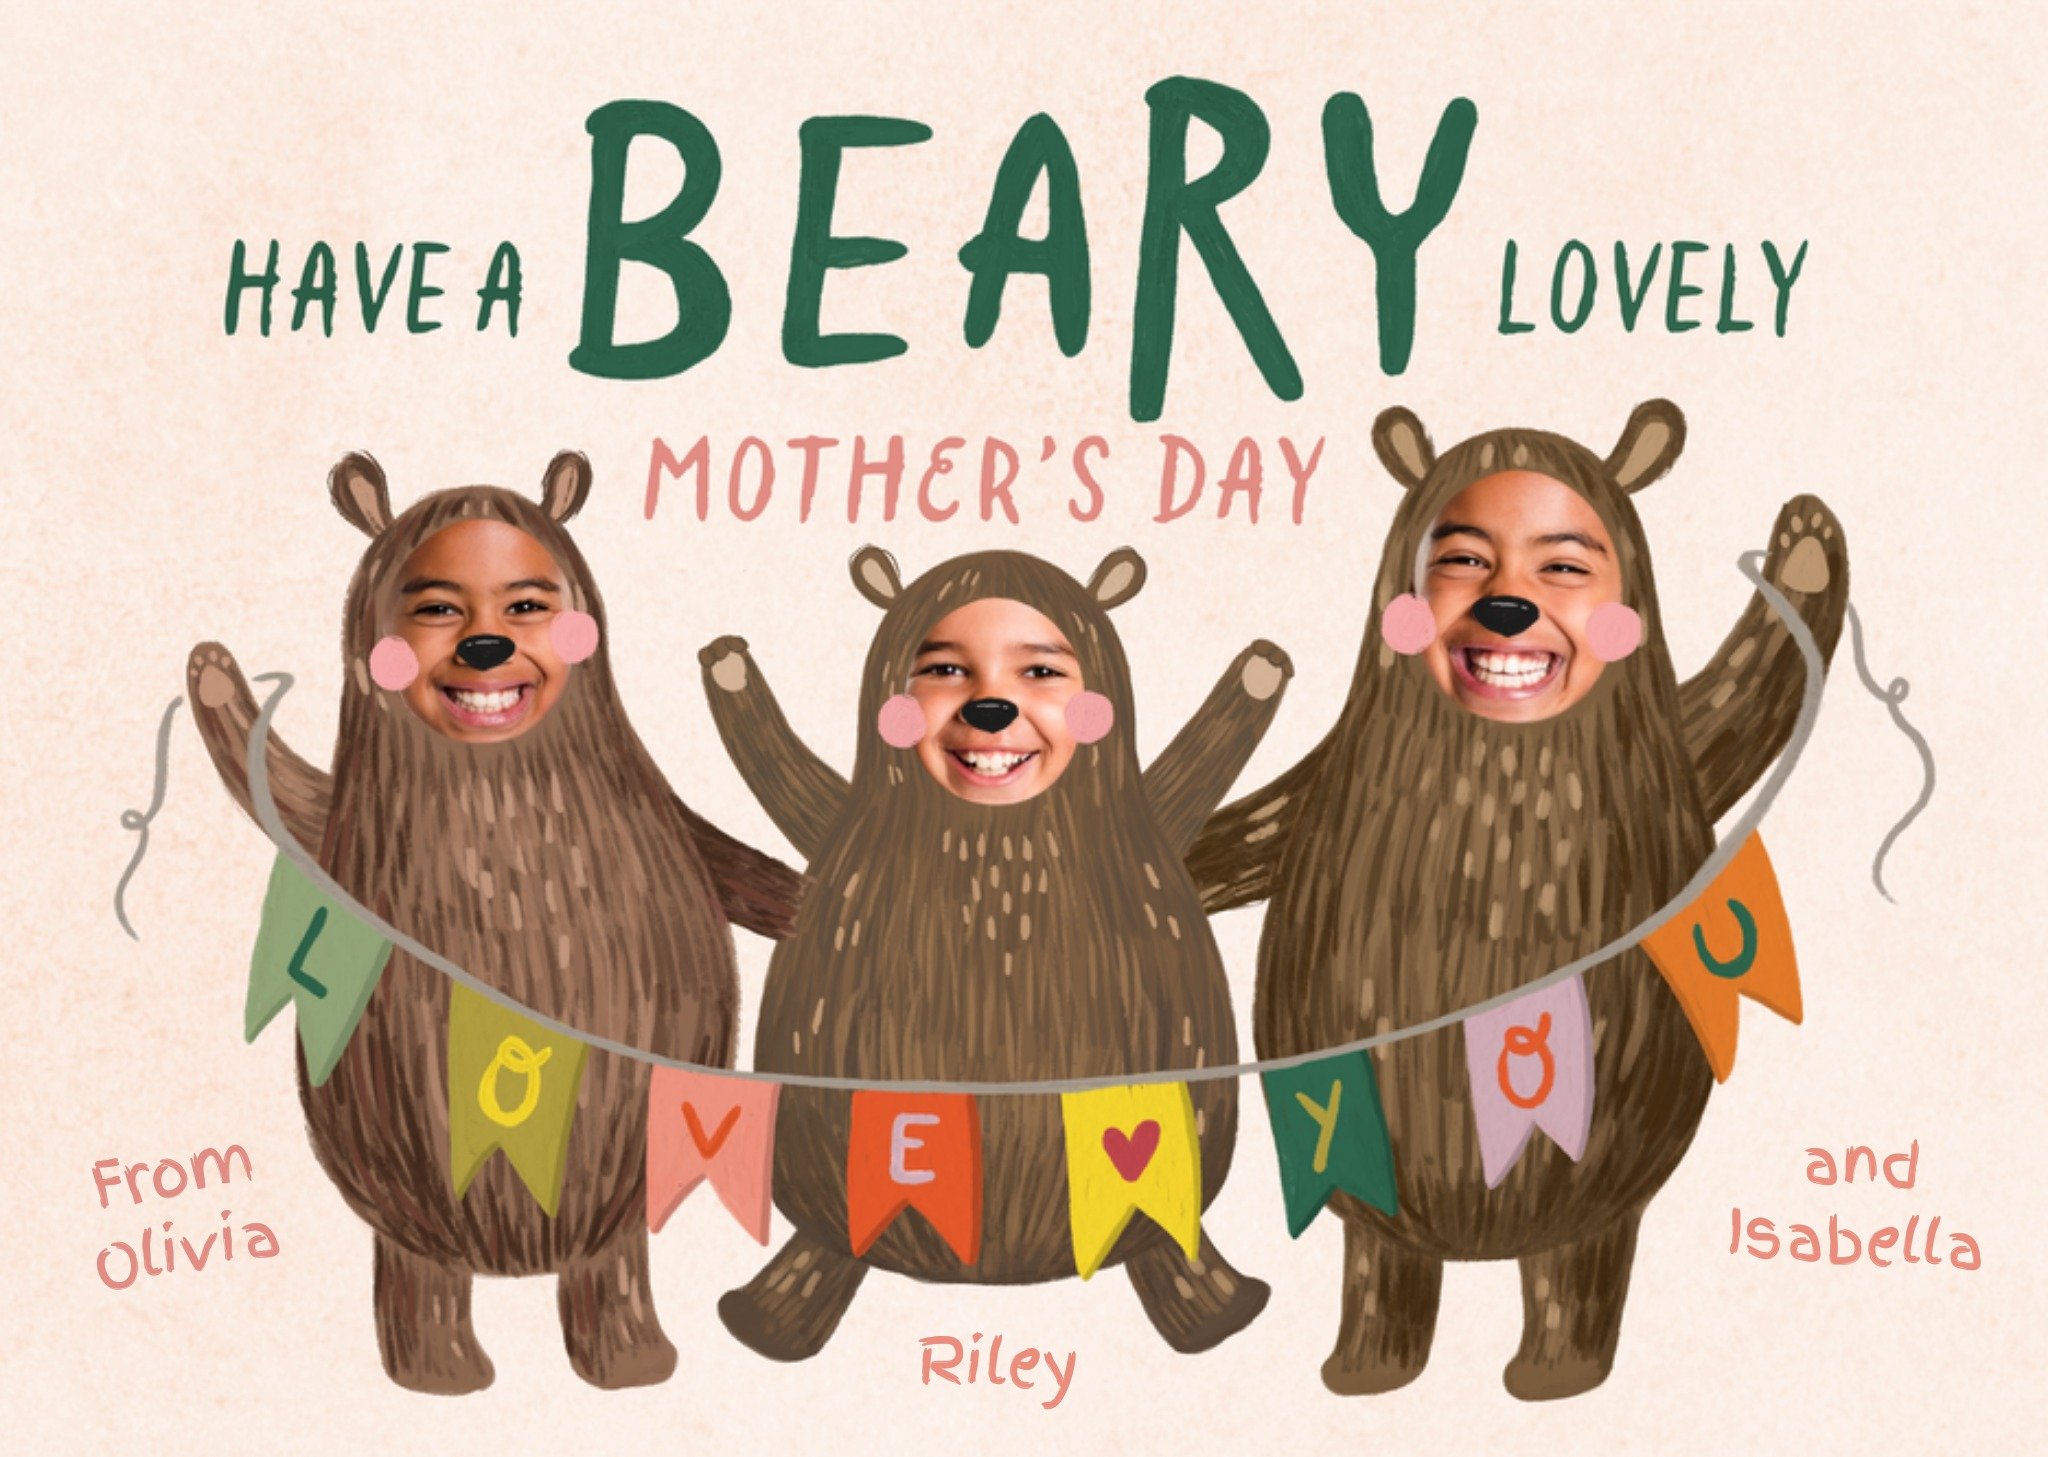 Moonpig Three Bear Cubs Face In Hole Photo Upload Beary Lovely Mother's Day Card, Large